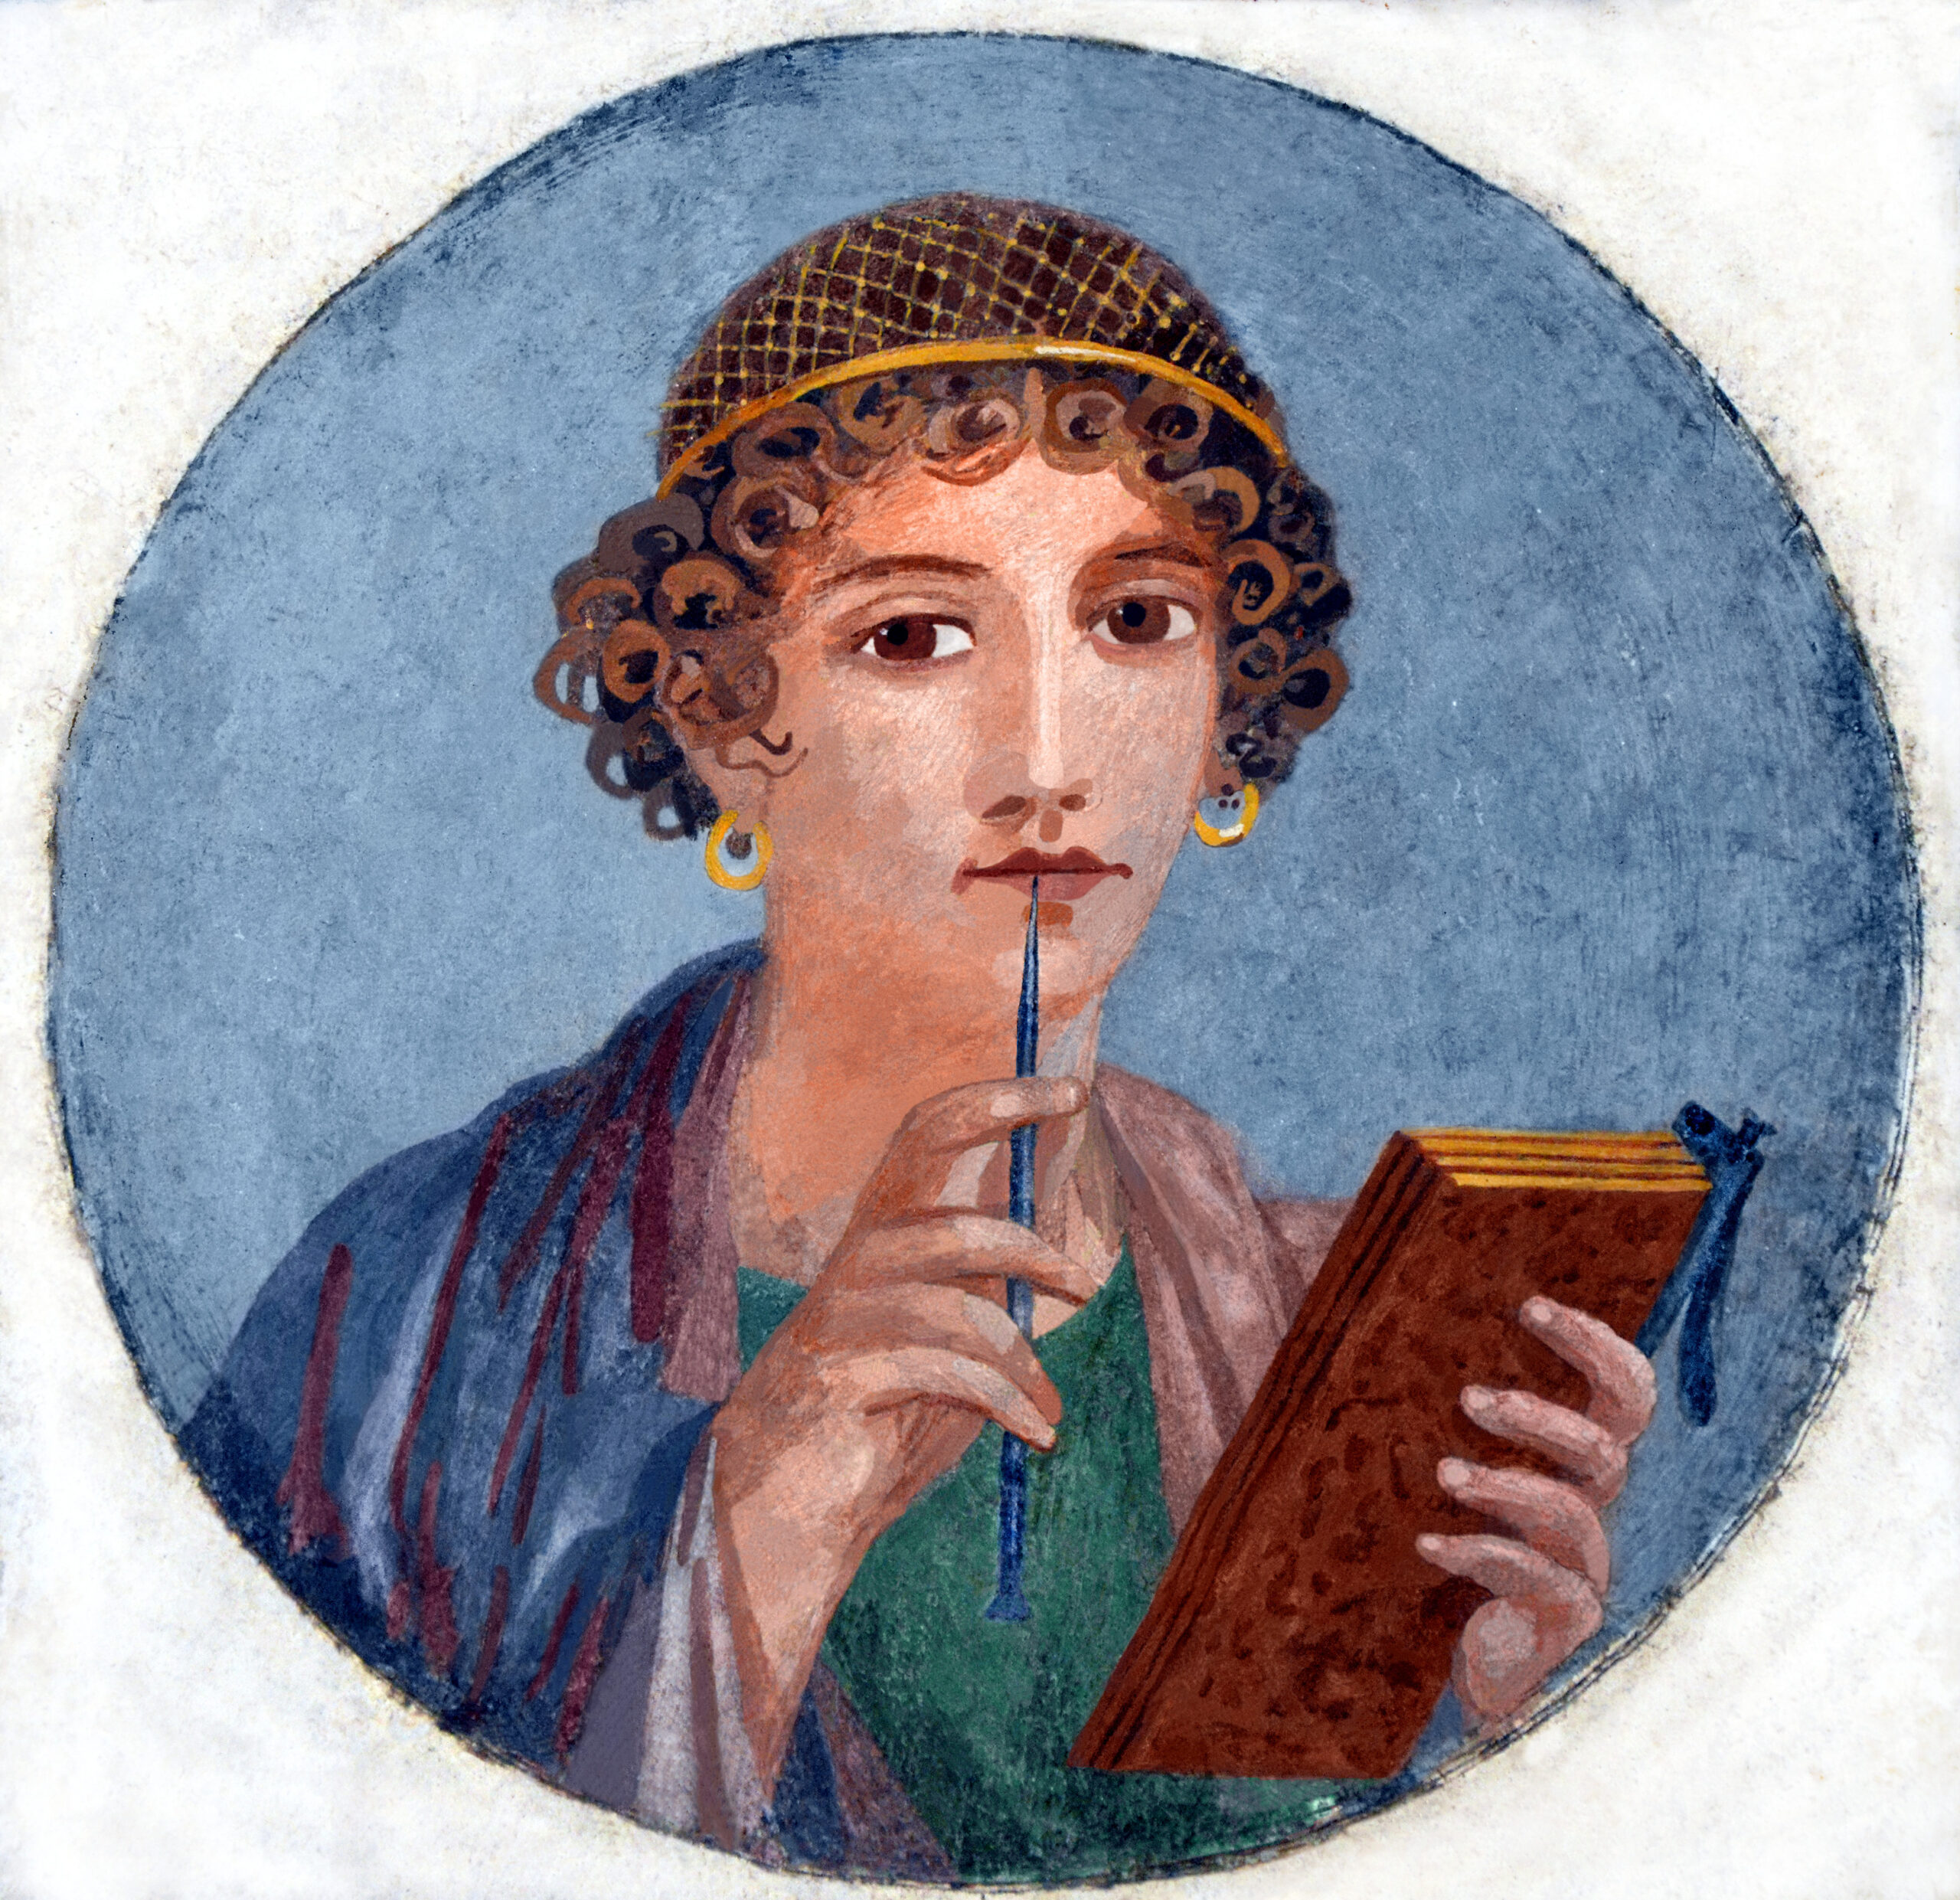 Poetess, Sappho, gazing out in thought.